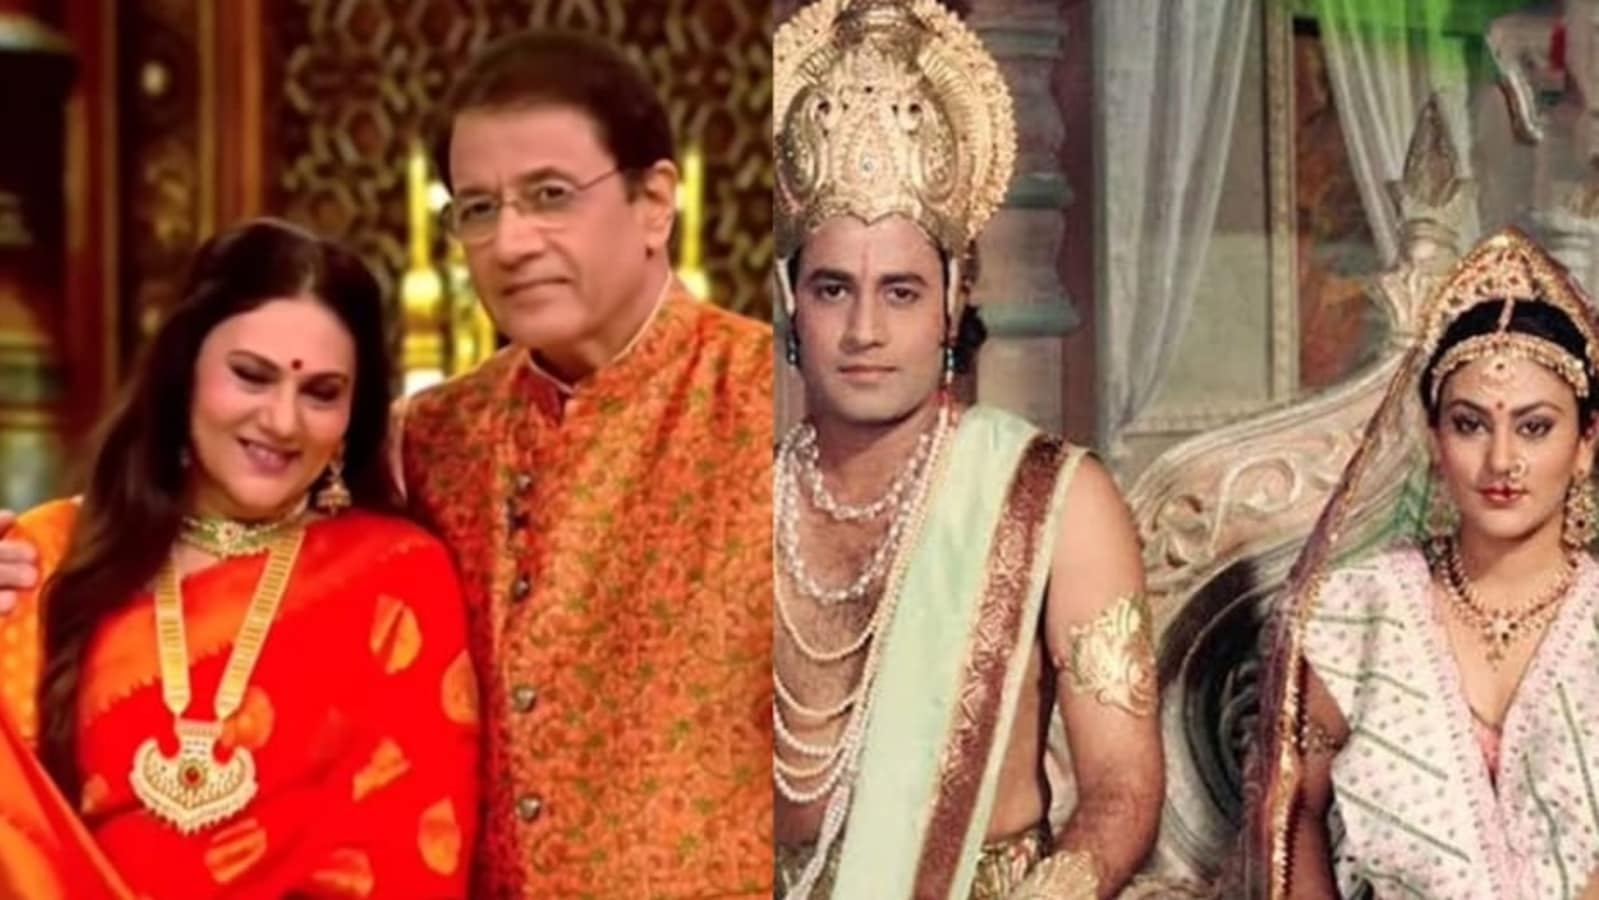 ‘Ram’ Arun Govil and ‘Sita’ Dipika Chikhlia will be seen once again on TV as Jhalak Dikhhla Jaa 10 guests. Watch